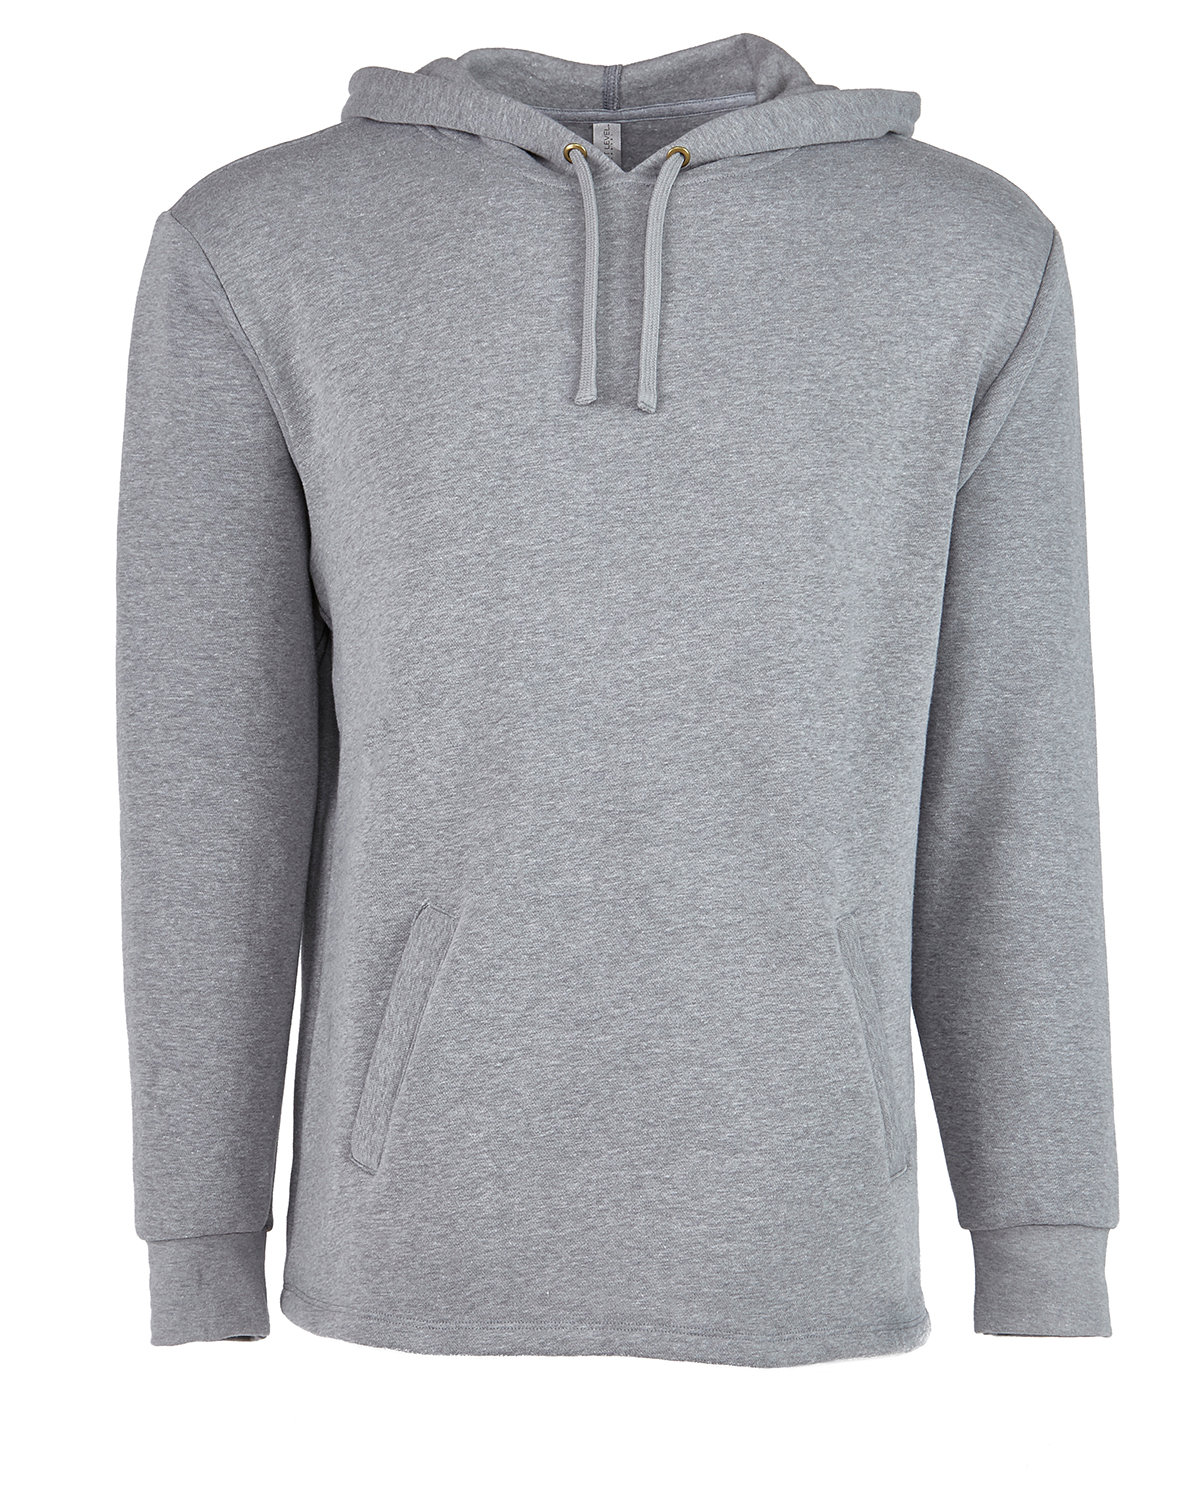 Next Level Apparel Adult PCH Pullover Hoodie heather gray 